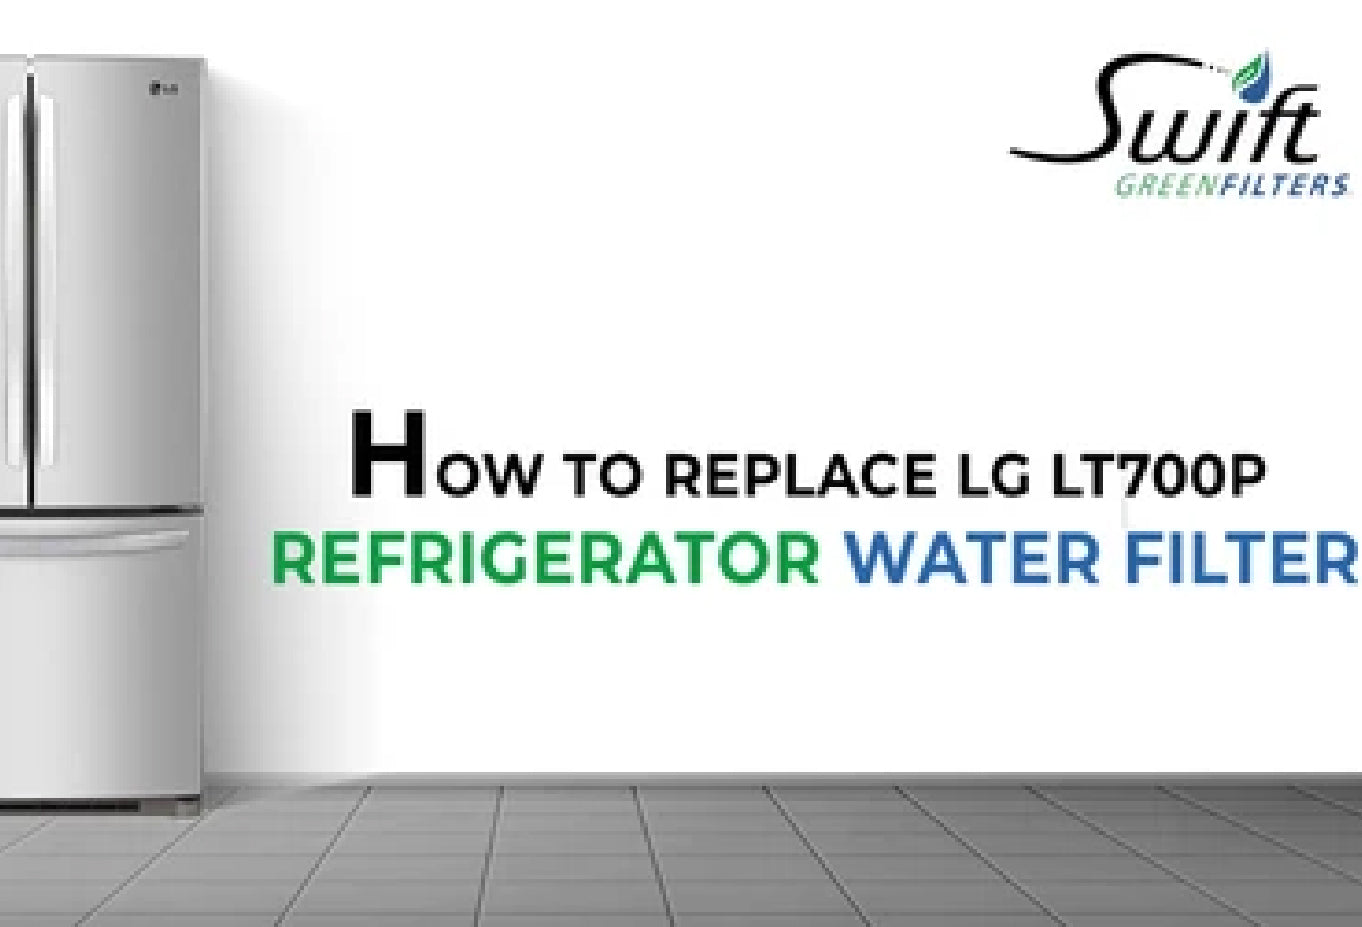 How to Replace LG LT700P Refrigerator Water Filter